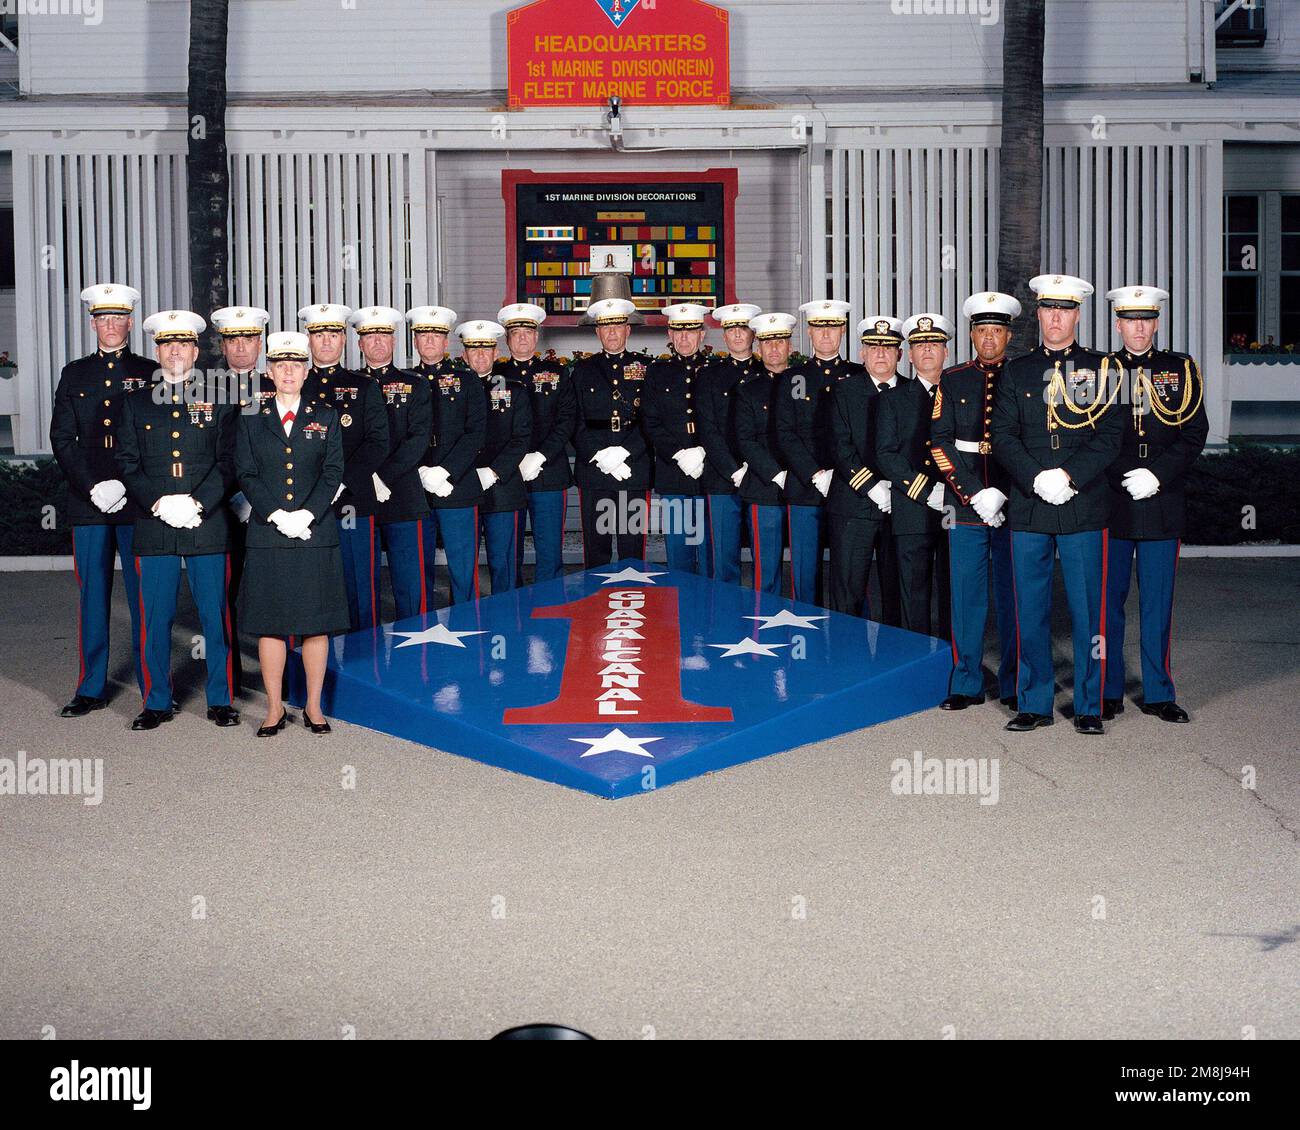 Exterior, MLS, MG Charles E. Wilhelm, USMC, Commanding General 1ST Marine Division and 18 members of his principal staff, in dress blues, line up on two sides of a large replica of the 1ST Marine Division Patch and Seal. In background behind the staff is a sign, 'HEADQUARTERS 1ST MARINE DIVISION (REIN) FLEET MARINE FORCE'. Behind the staff is a large plaque showing the 1ST marine Division's Decorations and a ship's bell. The bell is from the USS WHARTON (AP-7) a WW II Troop Transport. The ship was named for the third Commandant of the Marine Corps, LTC Frank Wharton. Base: Marine Corps Base Ca Stock Photo